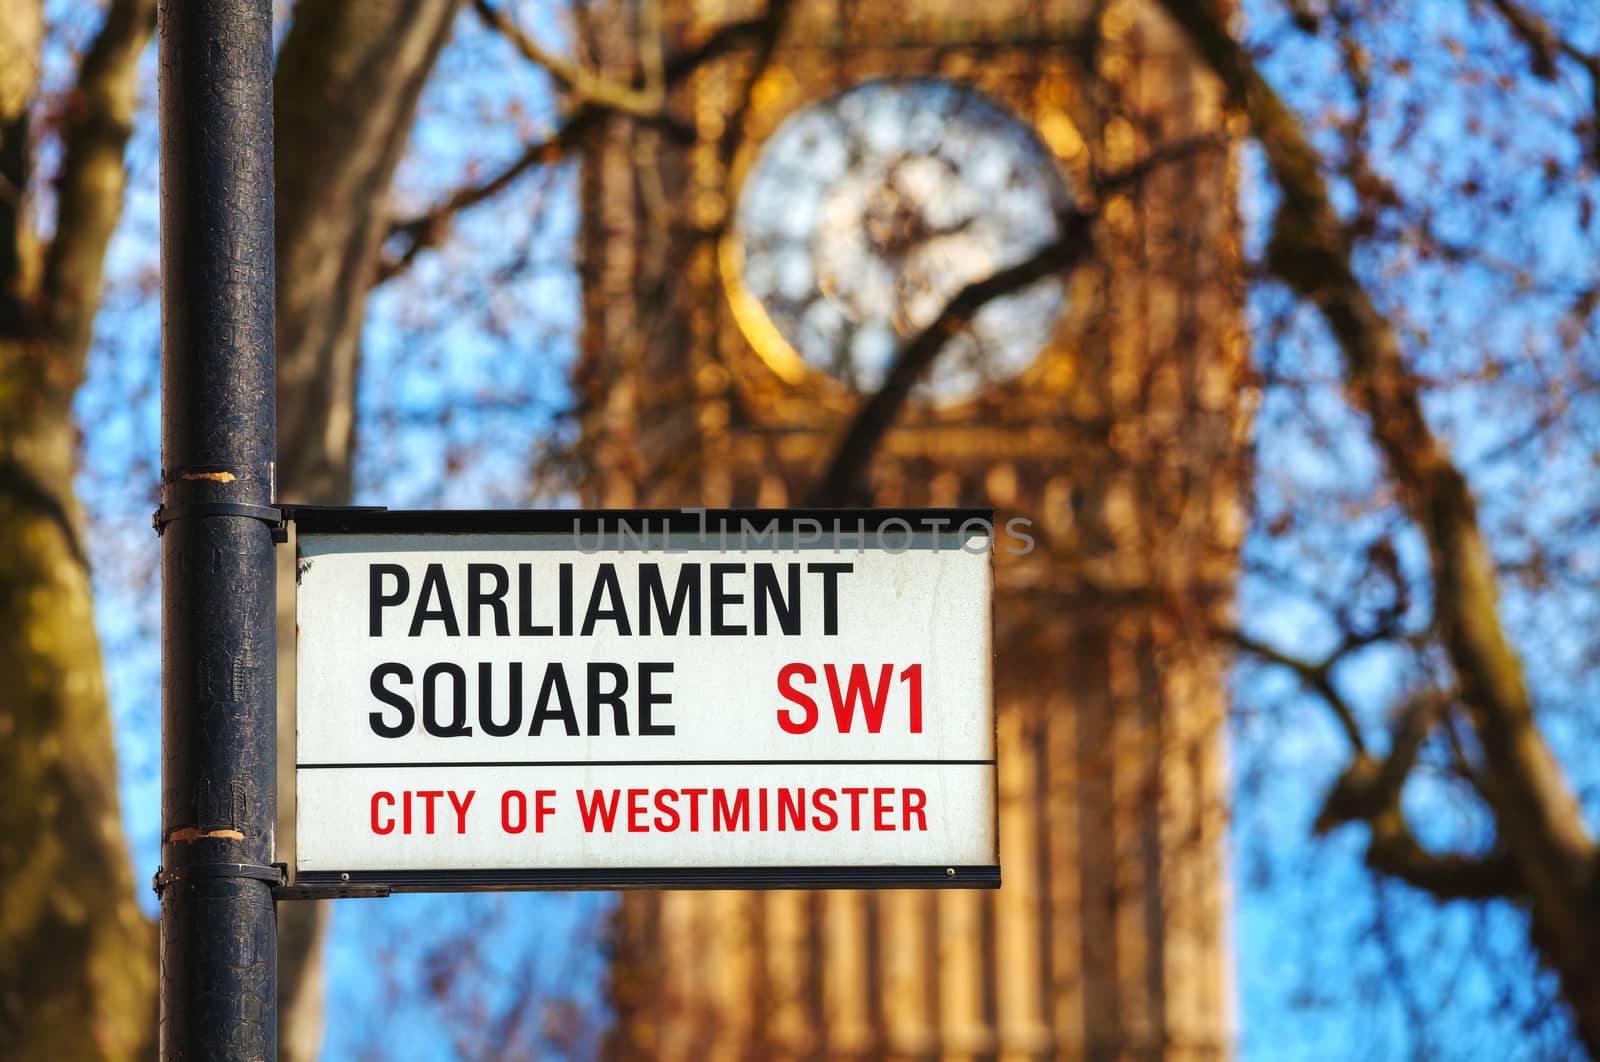 Parliament square sign in city of Westminster by AndreyKr